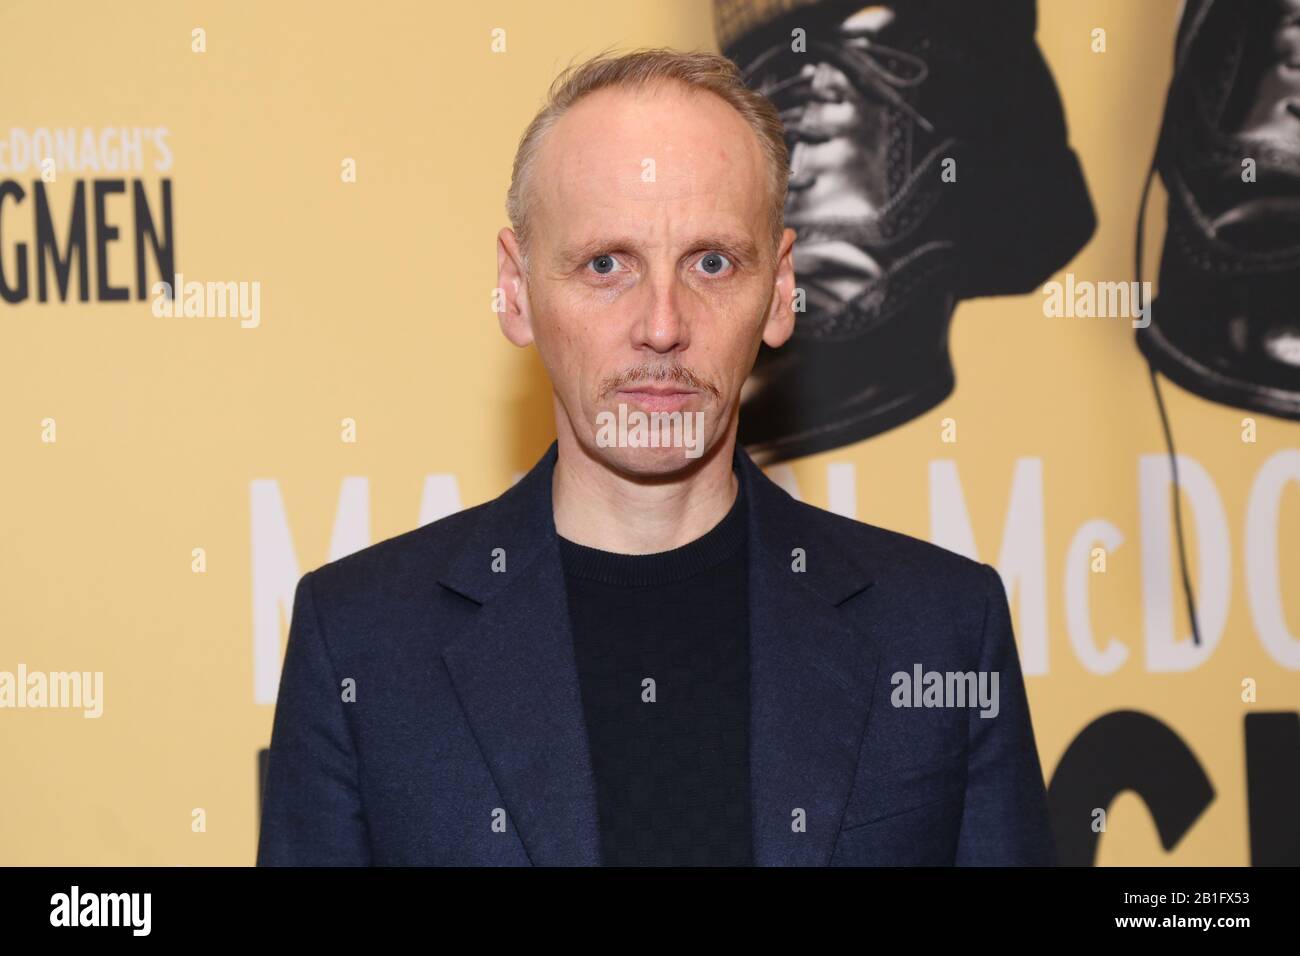 New York, NY, USA. 25th Feb, 2020. Ewen Bremner at the photo call for the play Hangmen held at the Westin Times Square Hotel on February 25, 2020 in New York City. Credit: Joseph Marzullo/Media Punch/Alamy Live News Stock Photo